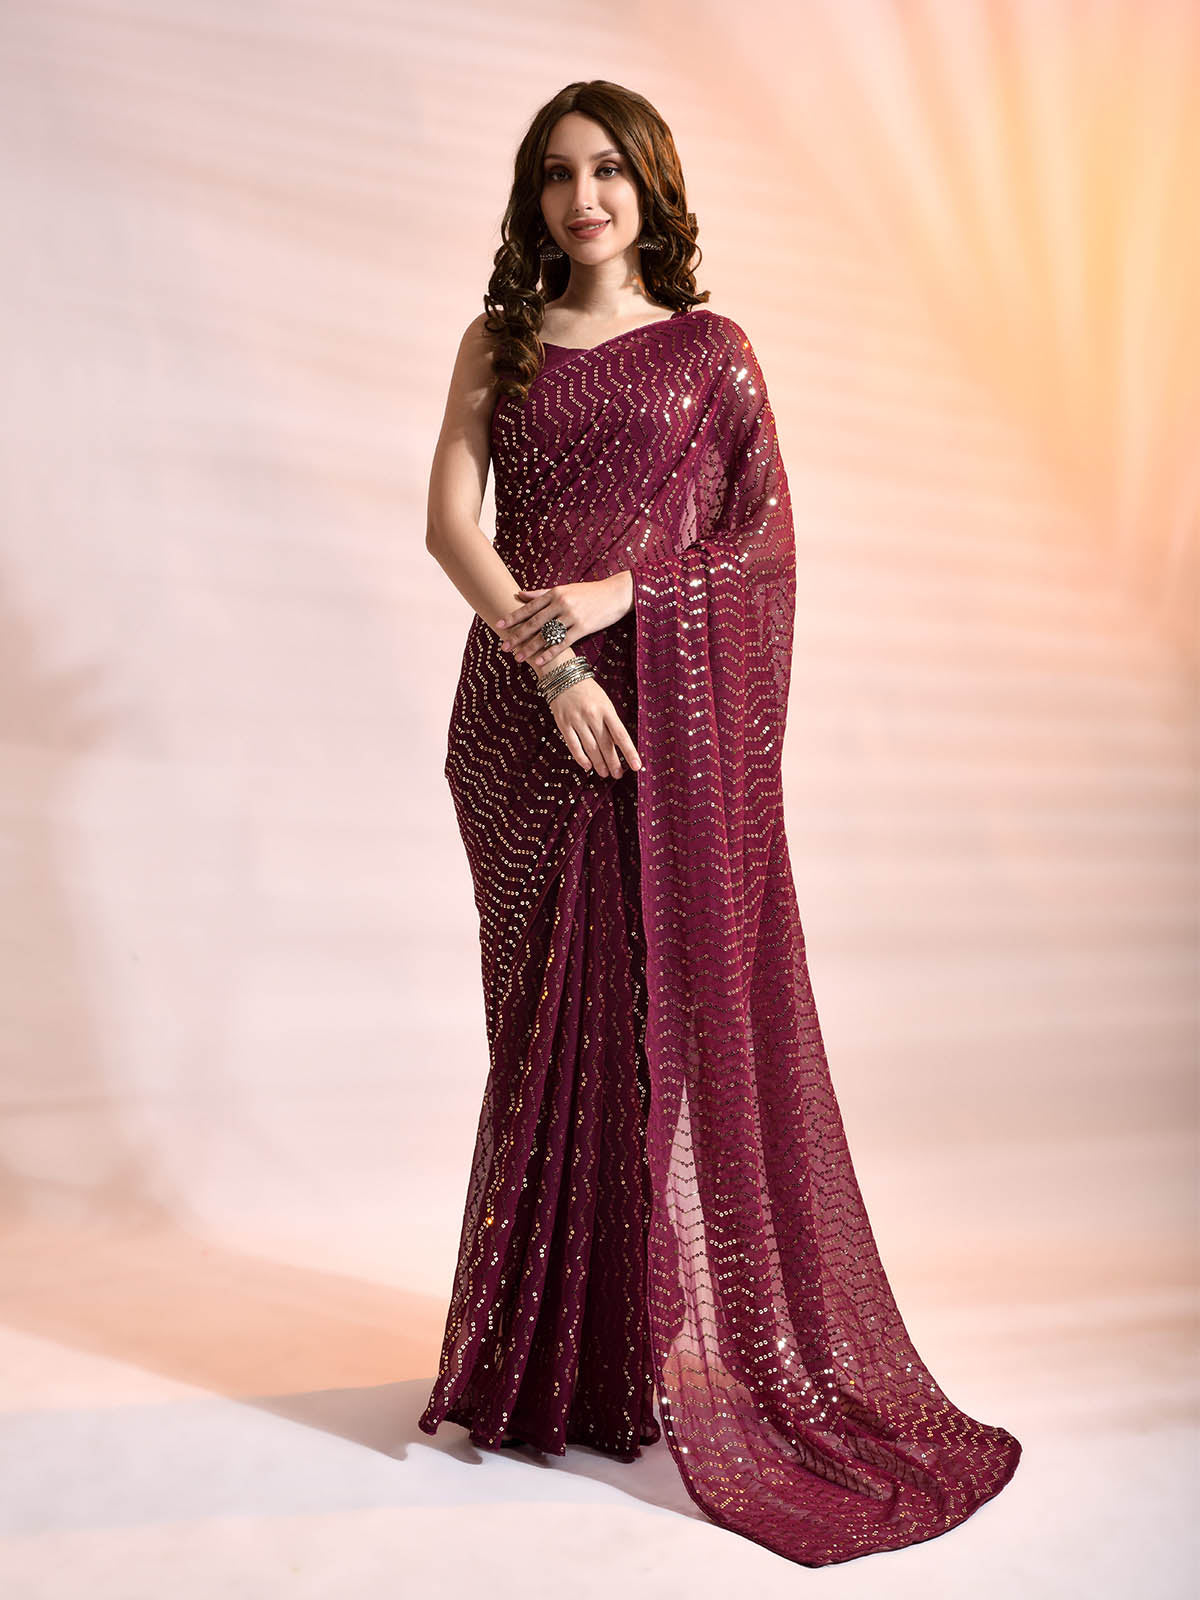 Women's Violet Georgette Saree With Blouse - Odette